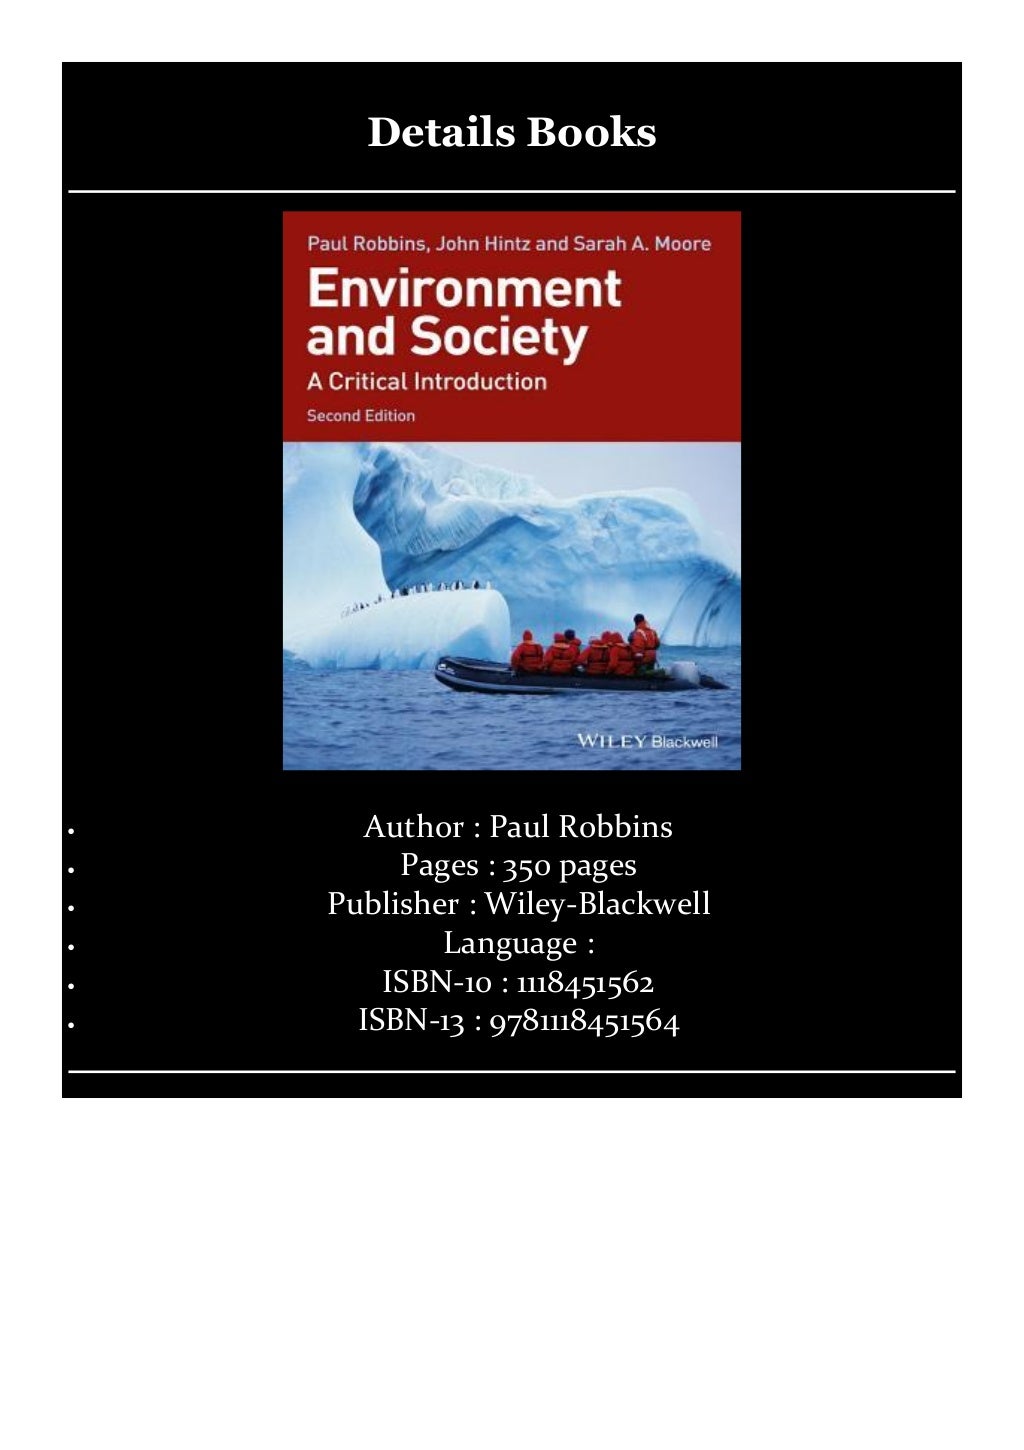 (Get!!!) Environment and Society: A Critical Introduction. Paul Robbi…